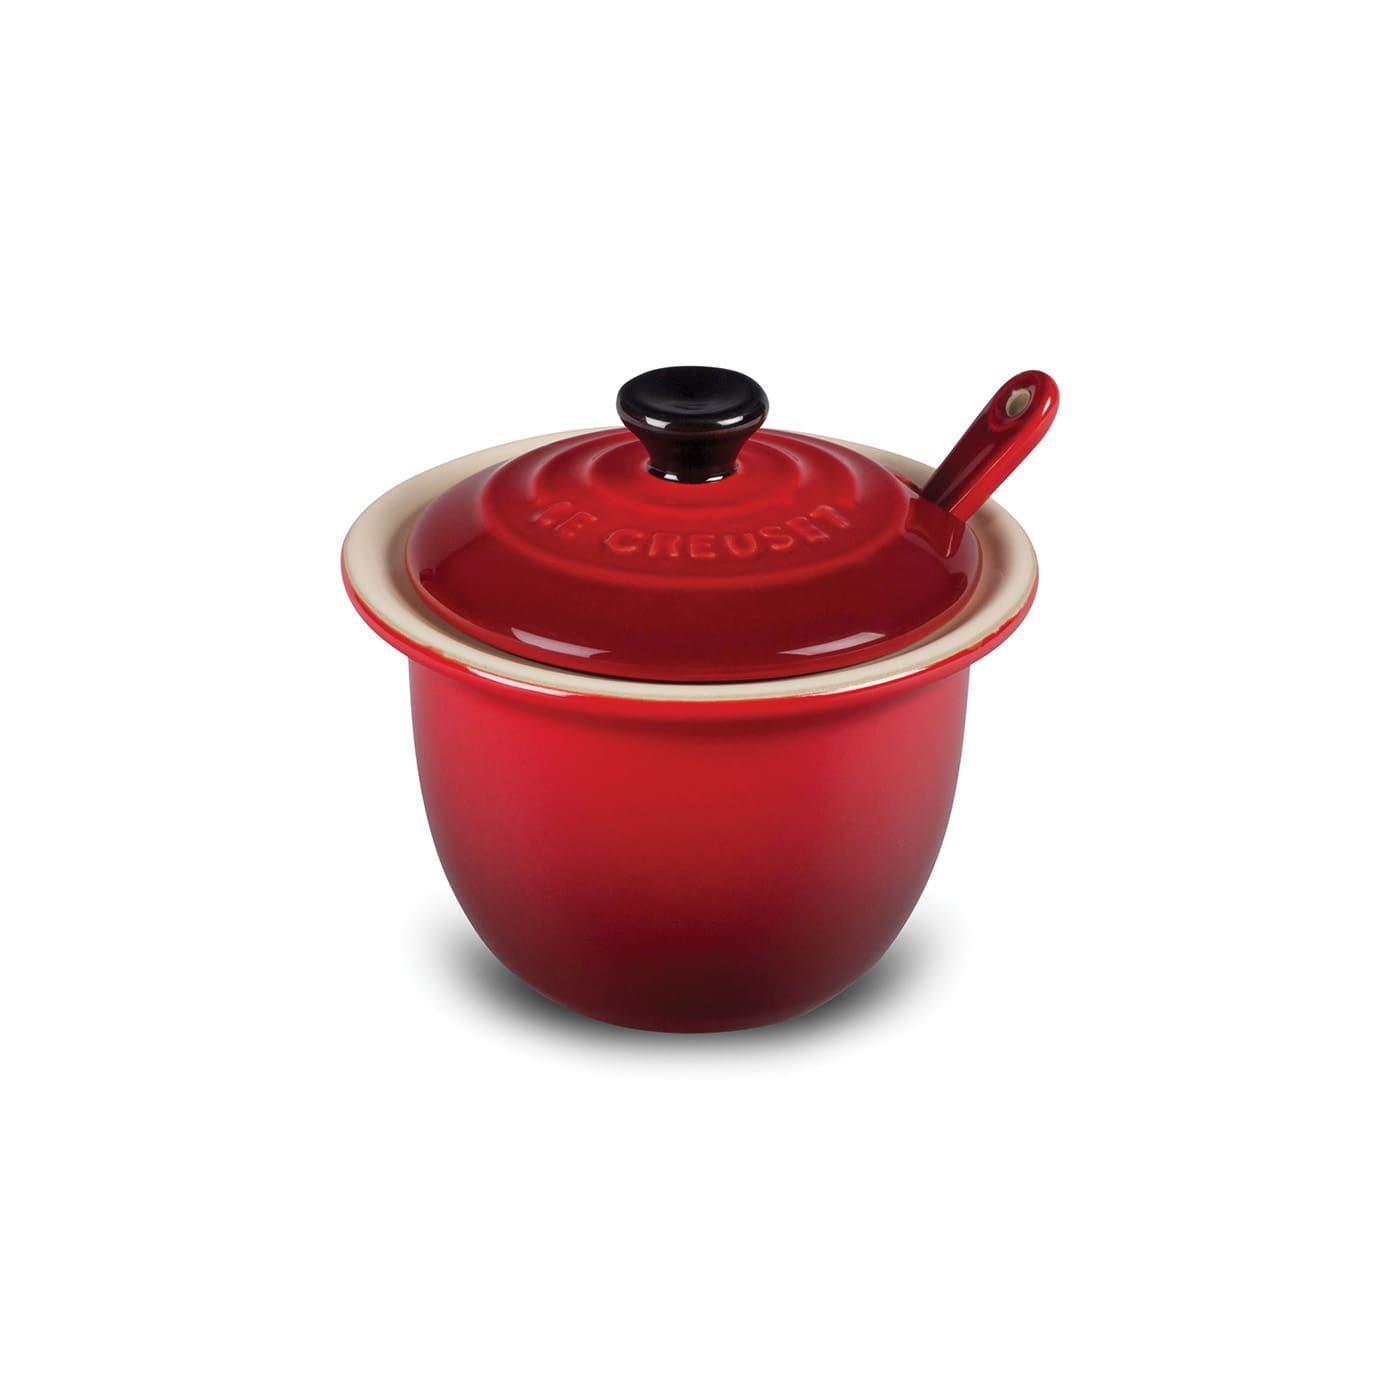 Le Creuset Stoneware Set of 2 Condiment Dish and Spoon Set, Cherry